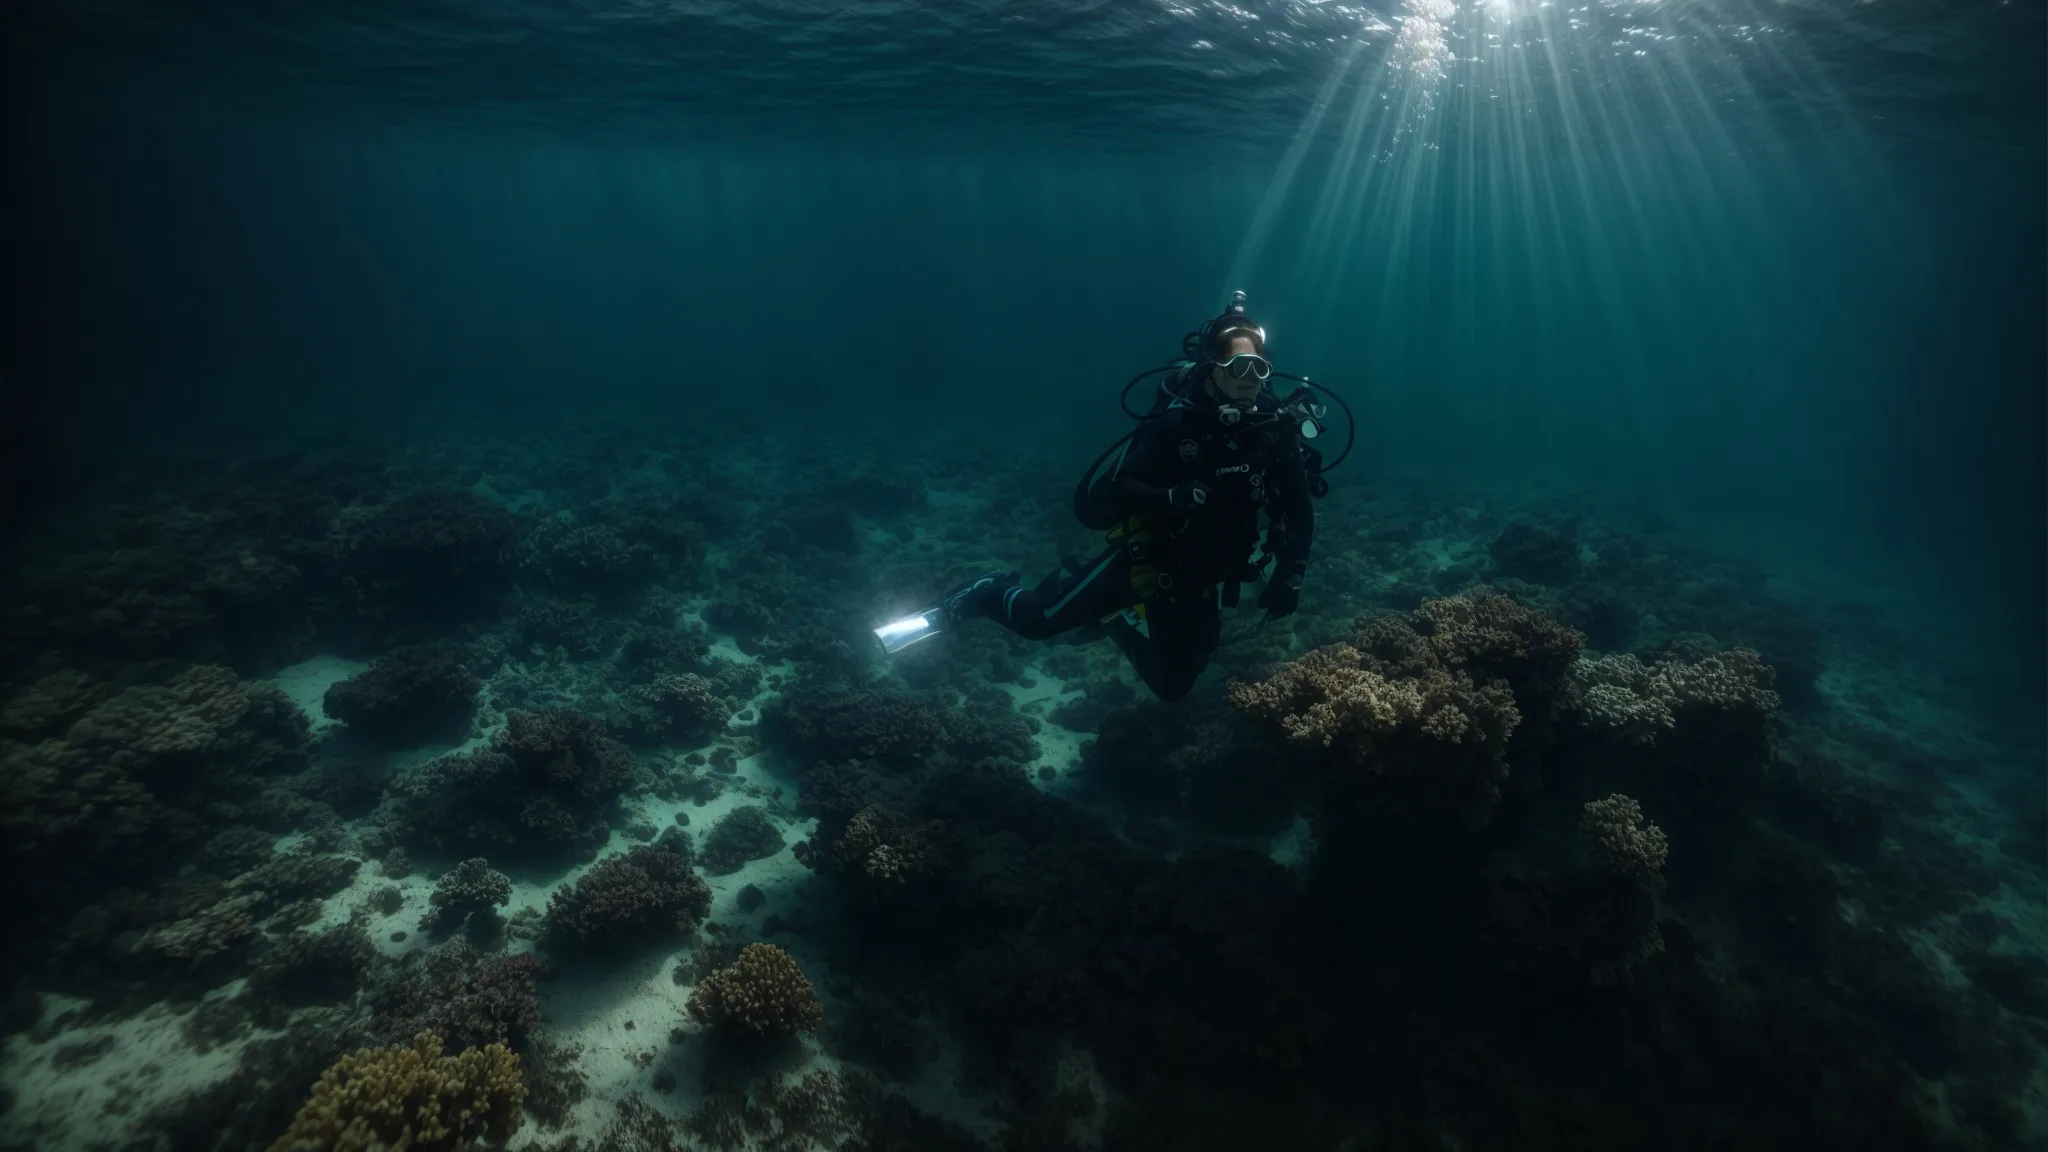 a diver equipped with an underwater light peering into a vast, shadowy ocean abyss.